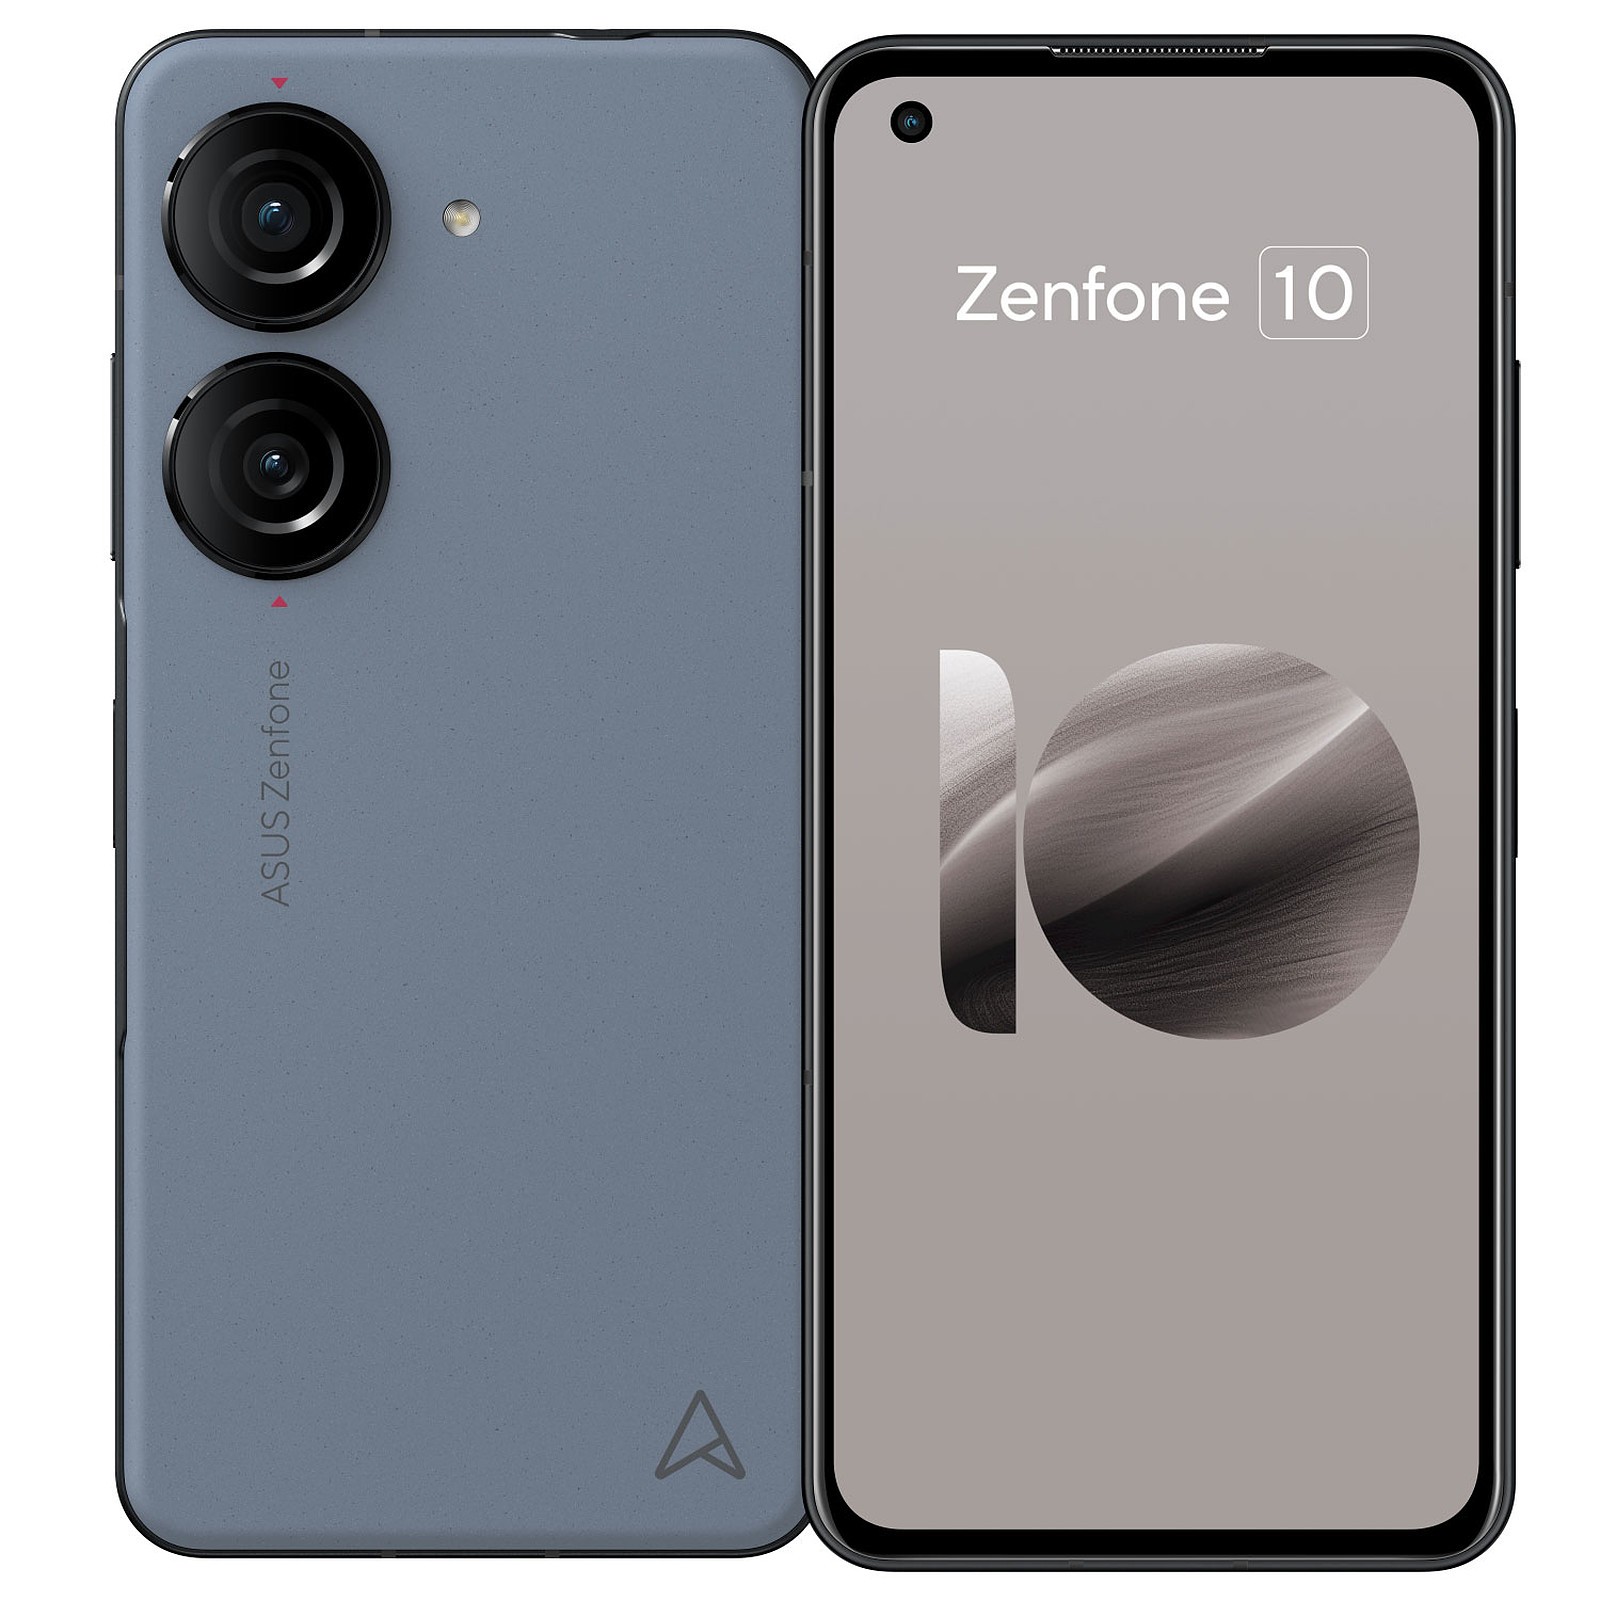 Asus ZenFone 10 launched globally with Qualcomm Snapdragon 8 Gen 2 and  144Hz display